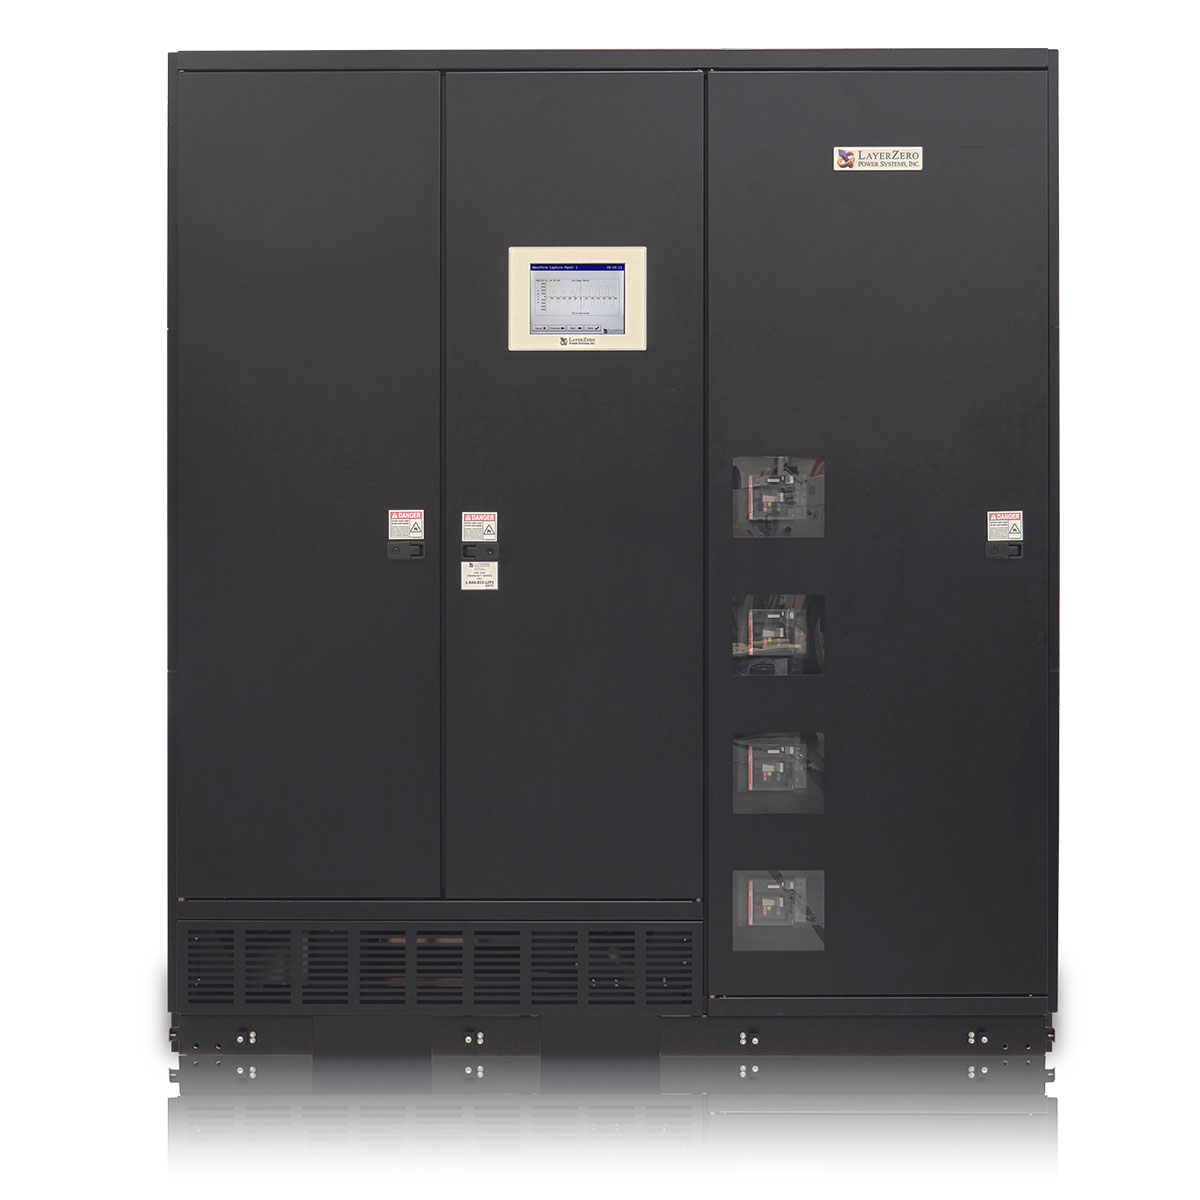 The LayerZero Series 70 ePODs: Type-X 750 kVA Power Distribution Unit (PDU) with  Subfeed Distribution.